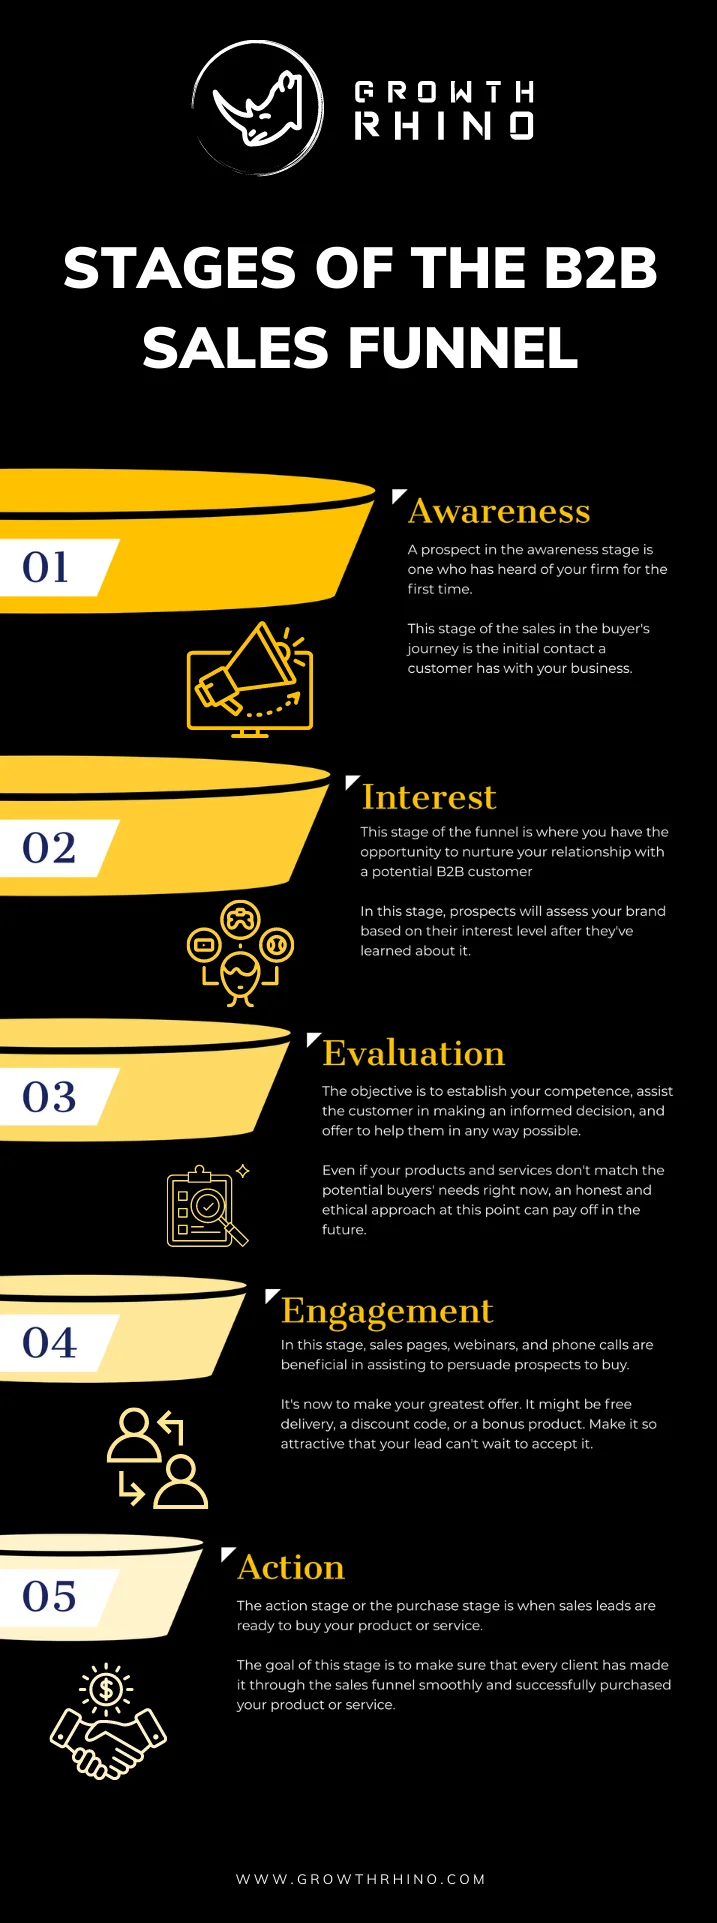 Stages of B2B sales funnel